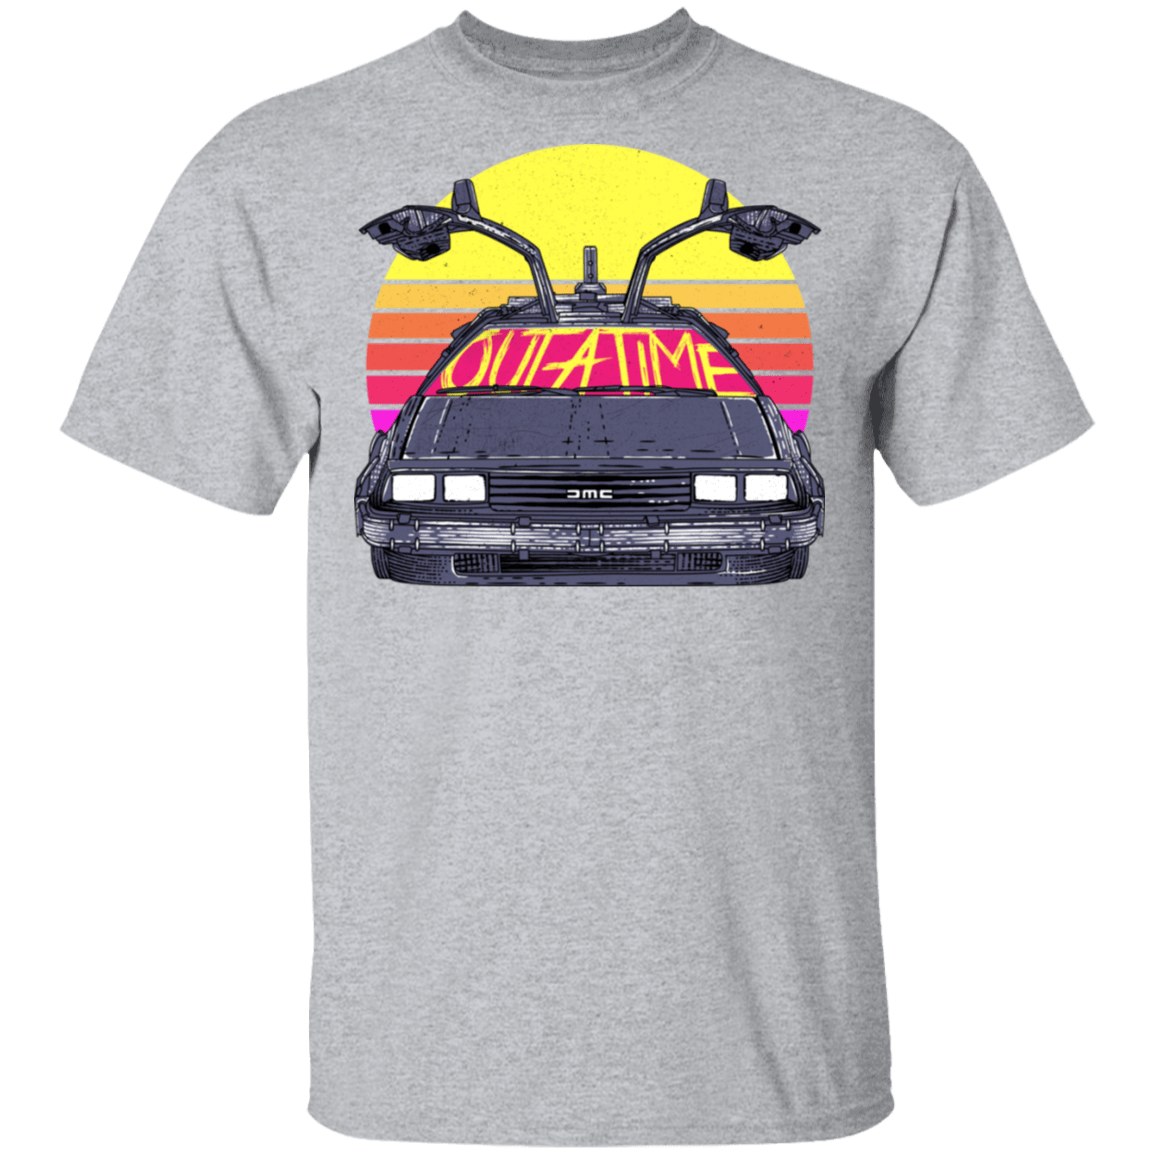 T-Shirts Sport Grey / S Outatime In The 80s T-Shirt